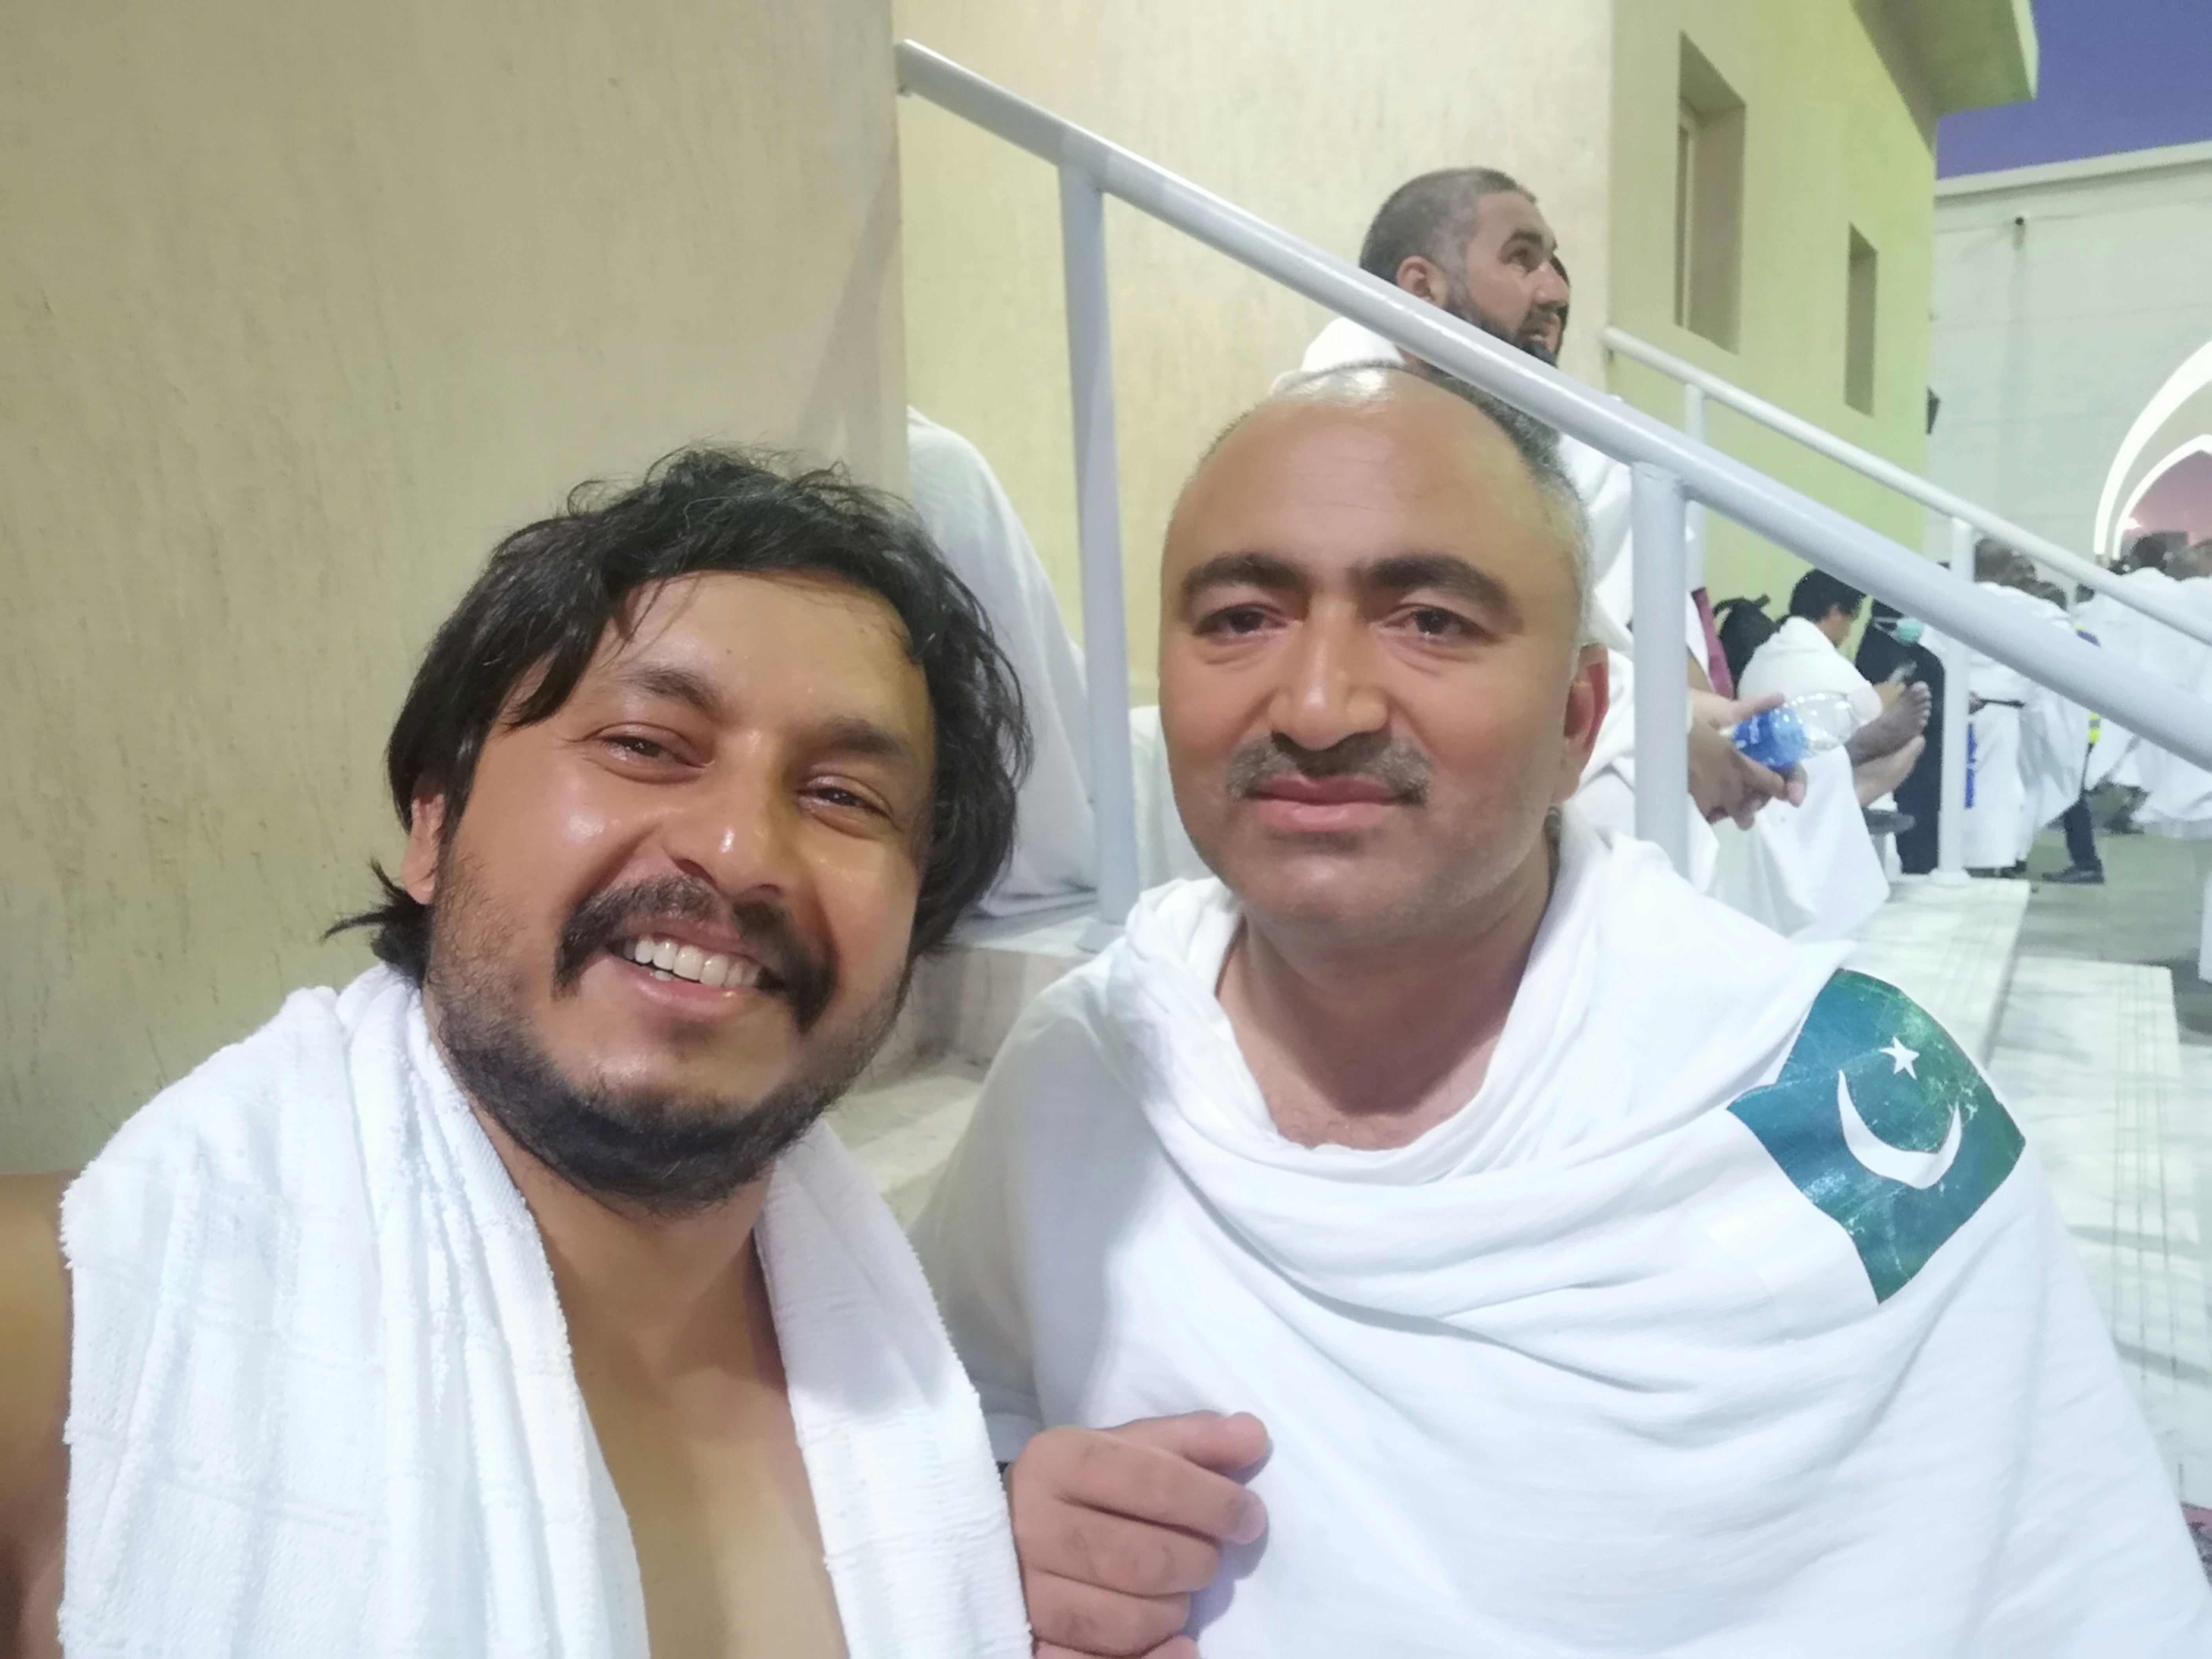 Tharik and Abid look to the camera in white robes